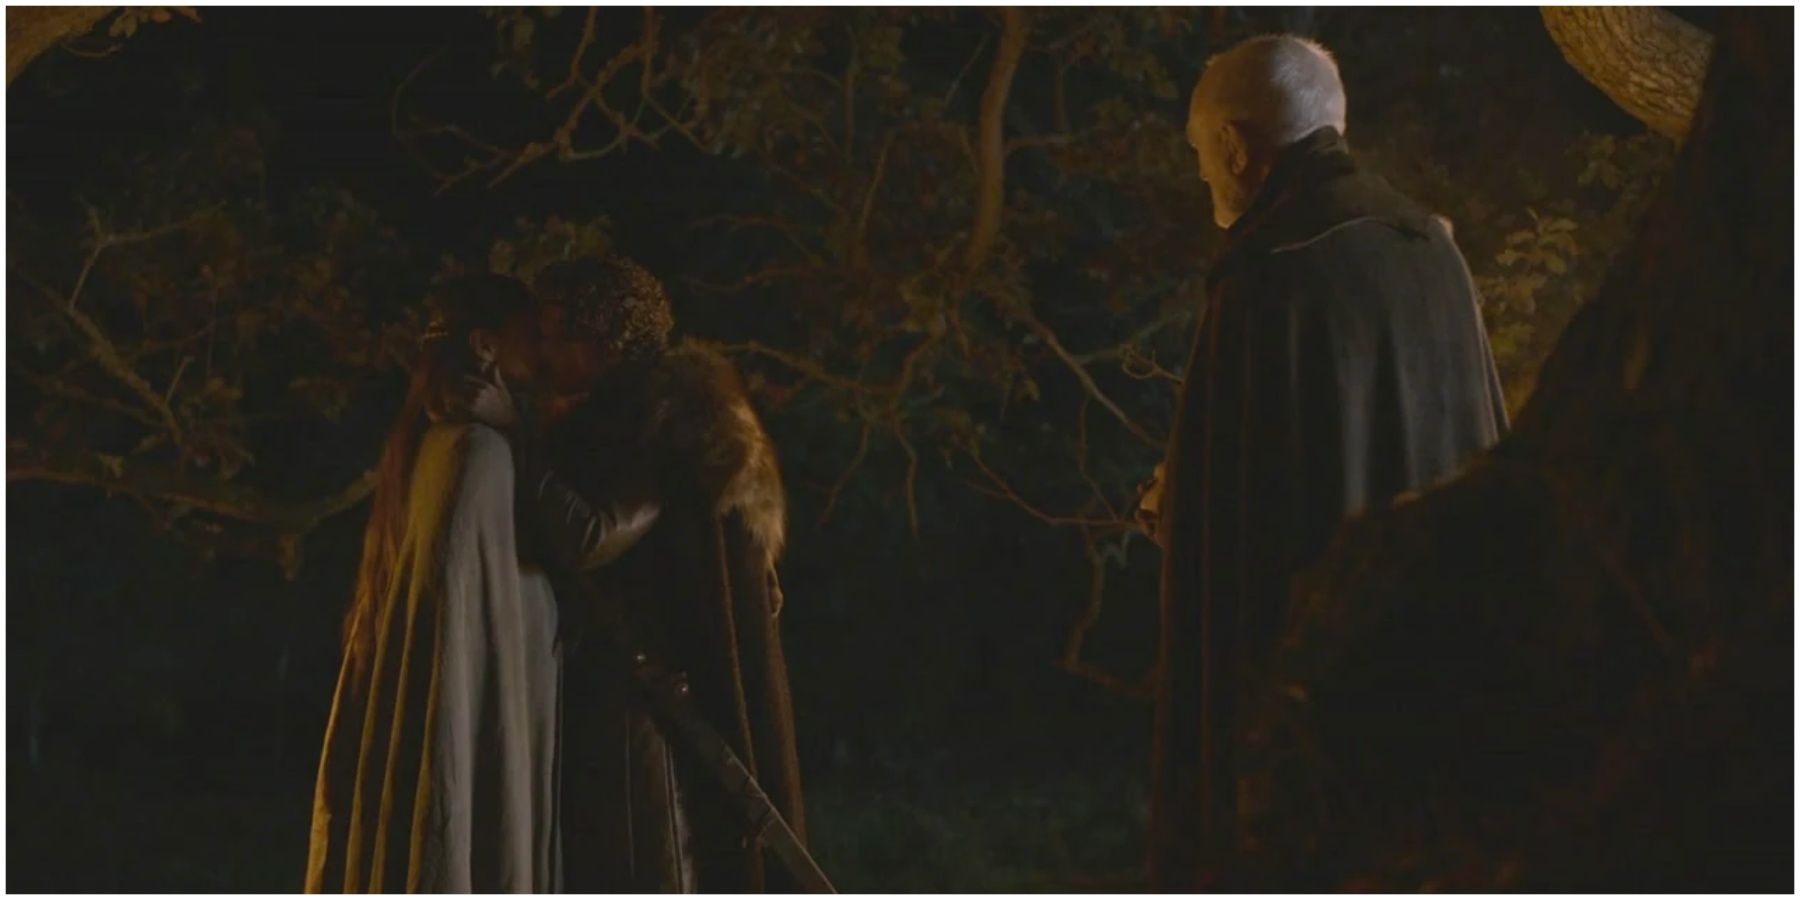 Robb Stark and Talisa Maegyr's wedding in Game of Thrones.